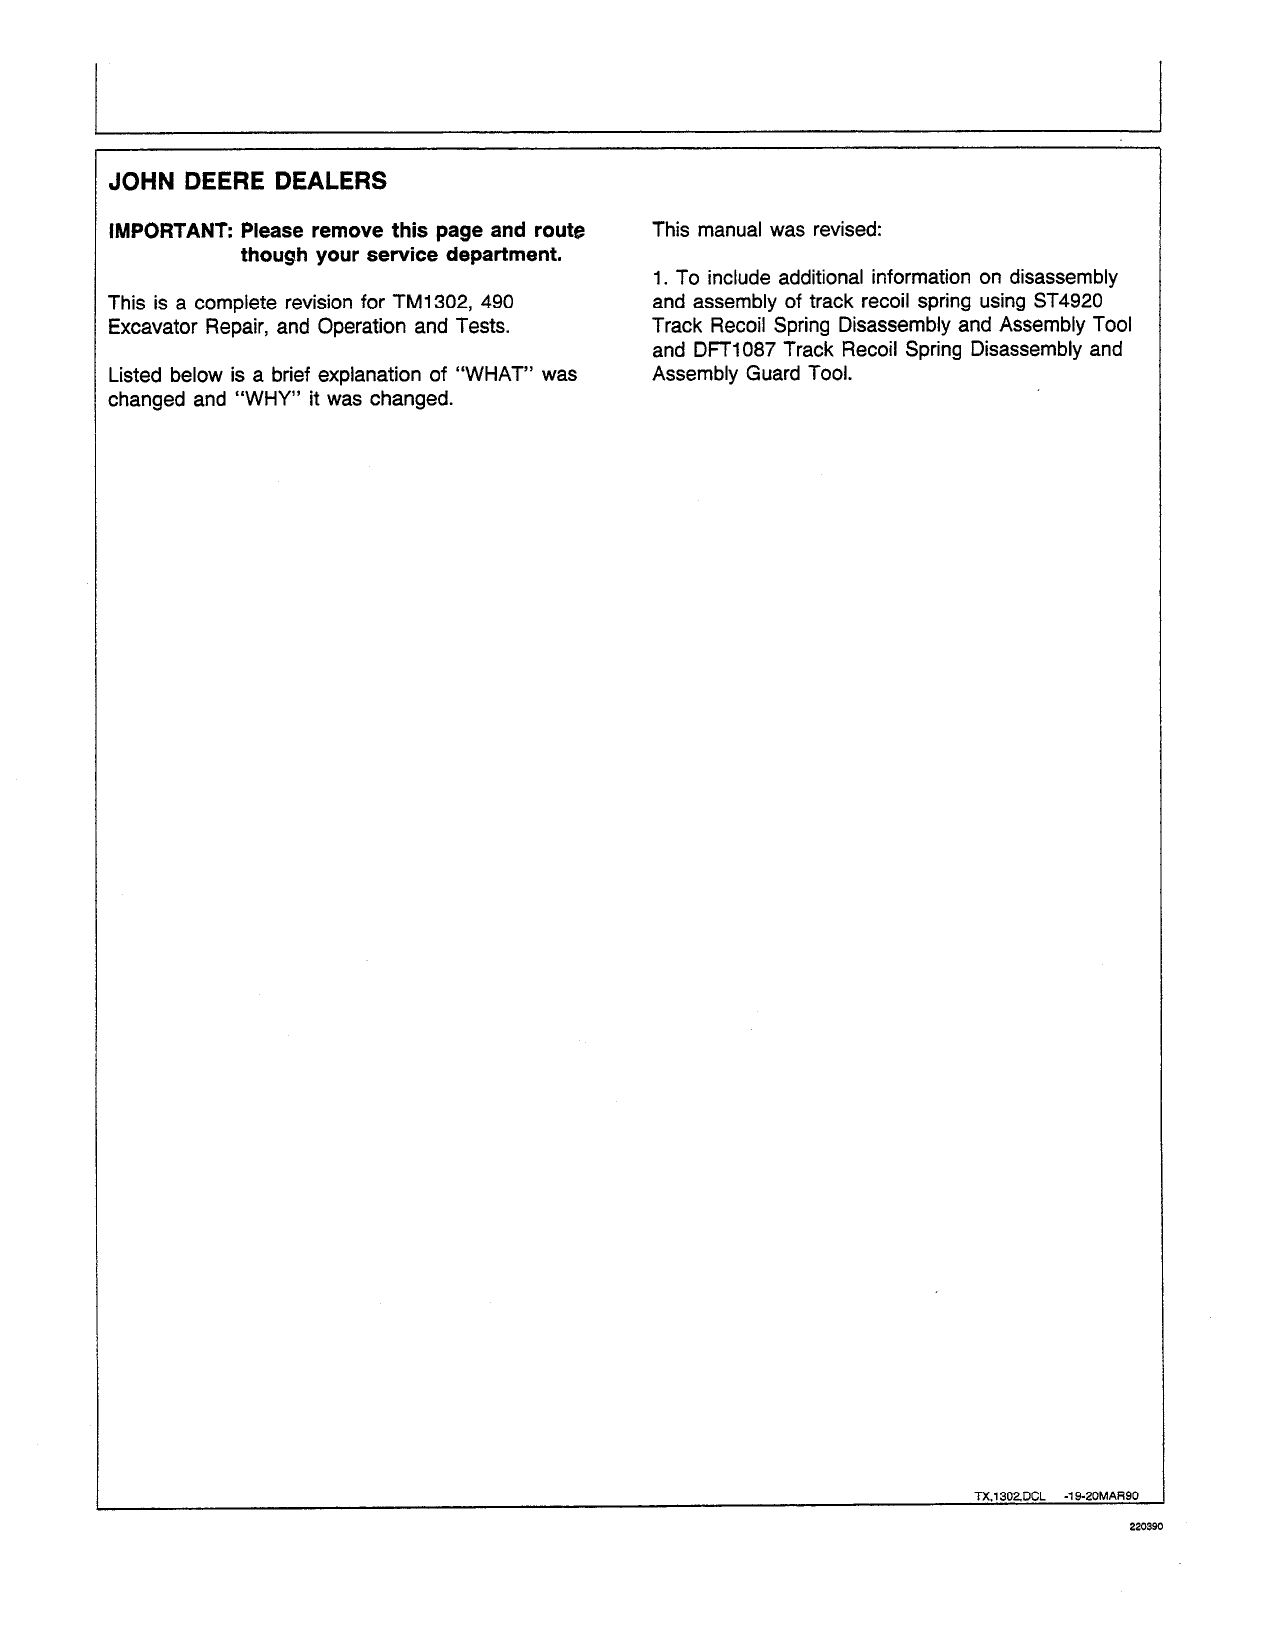 John Deere 490 Hydraulic Excavator technical manual Preview image 3